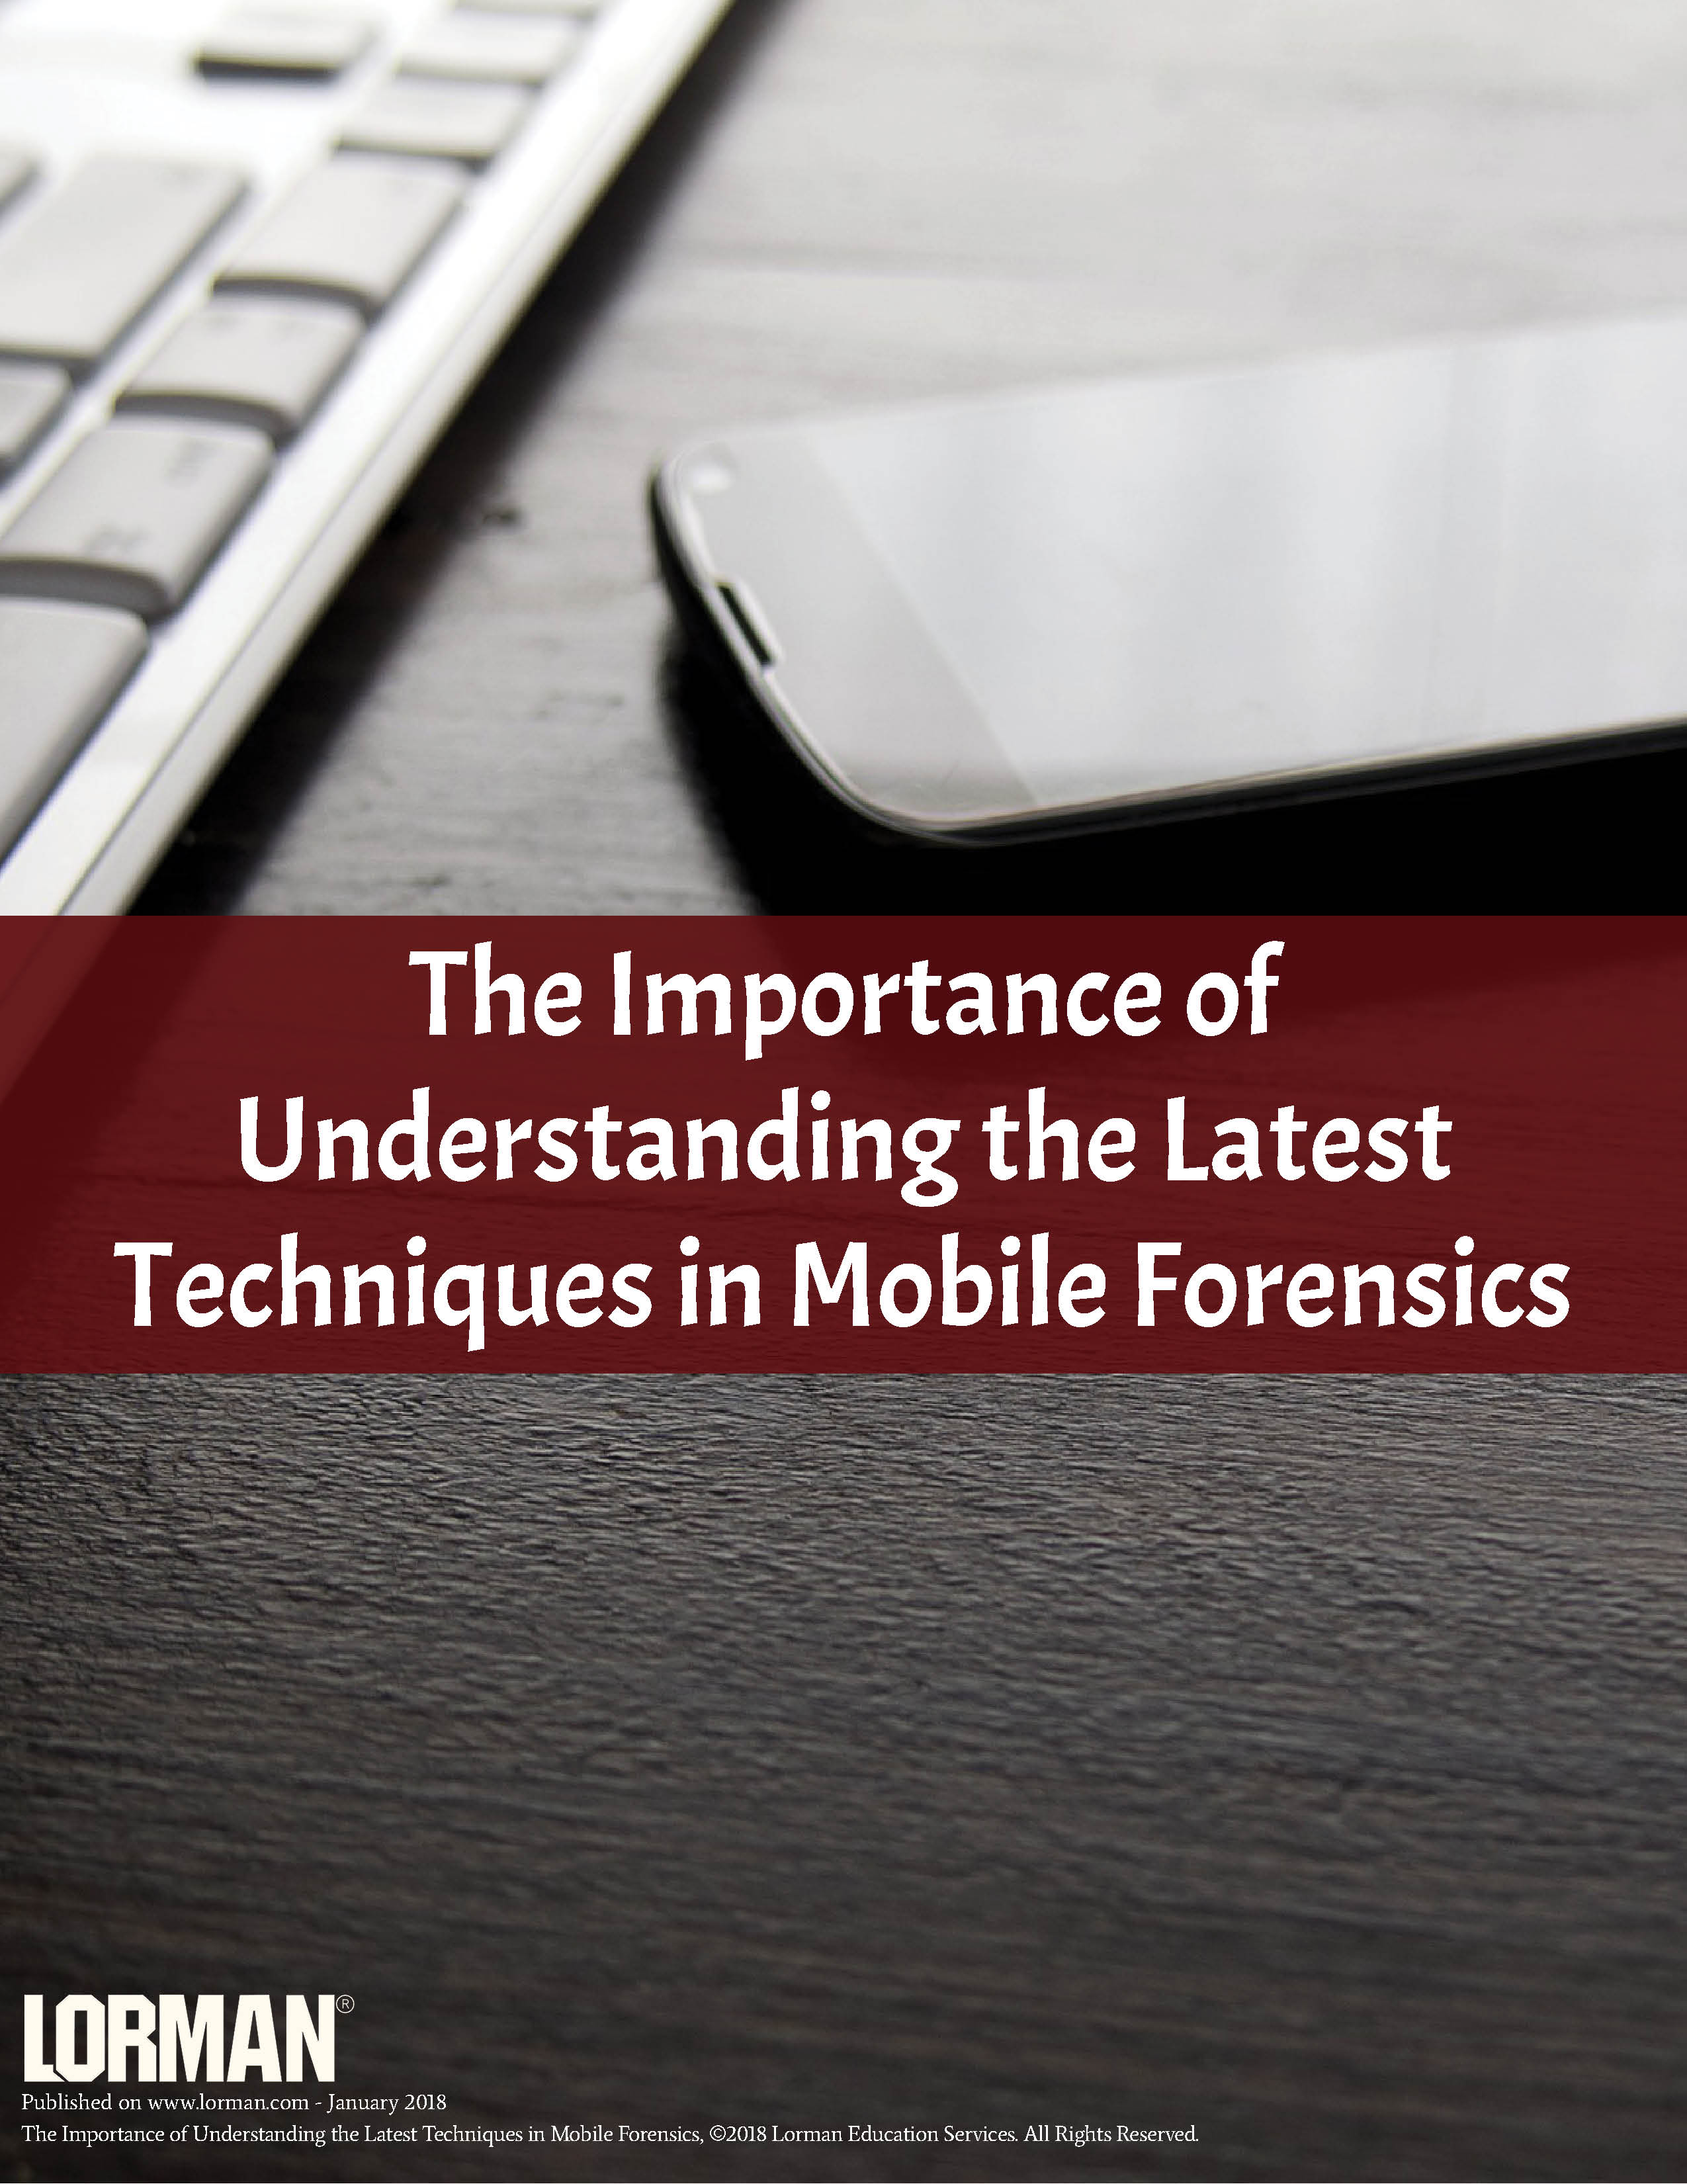 The Importance of Understanding the Latest Techniques in Mobile Forensics